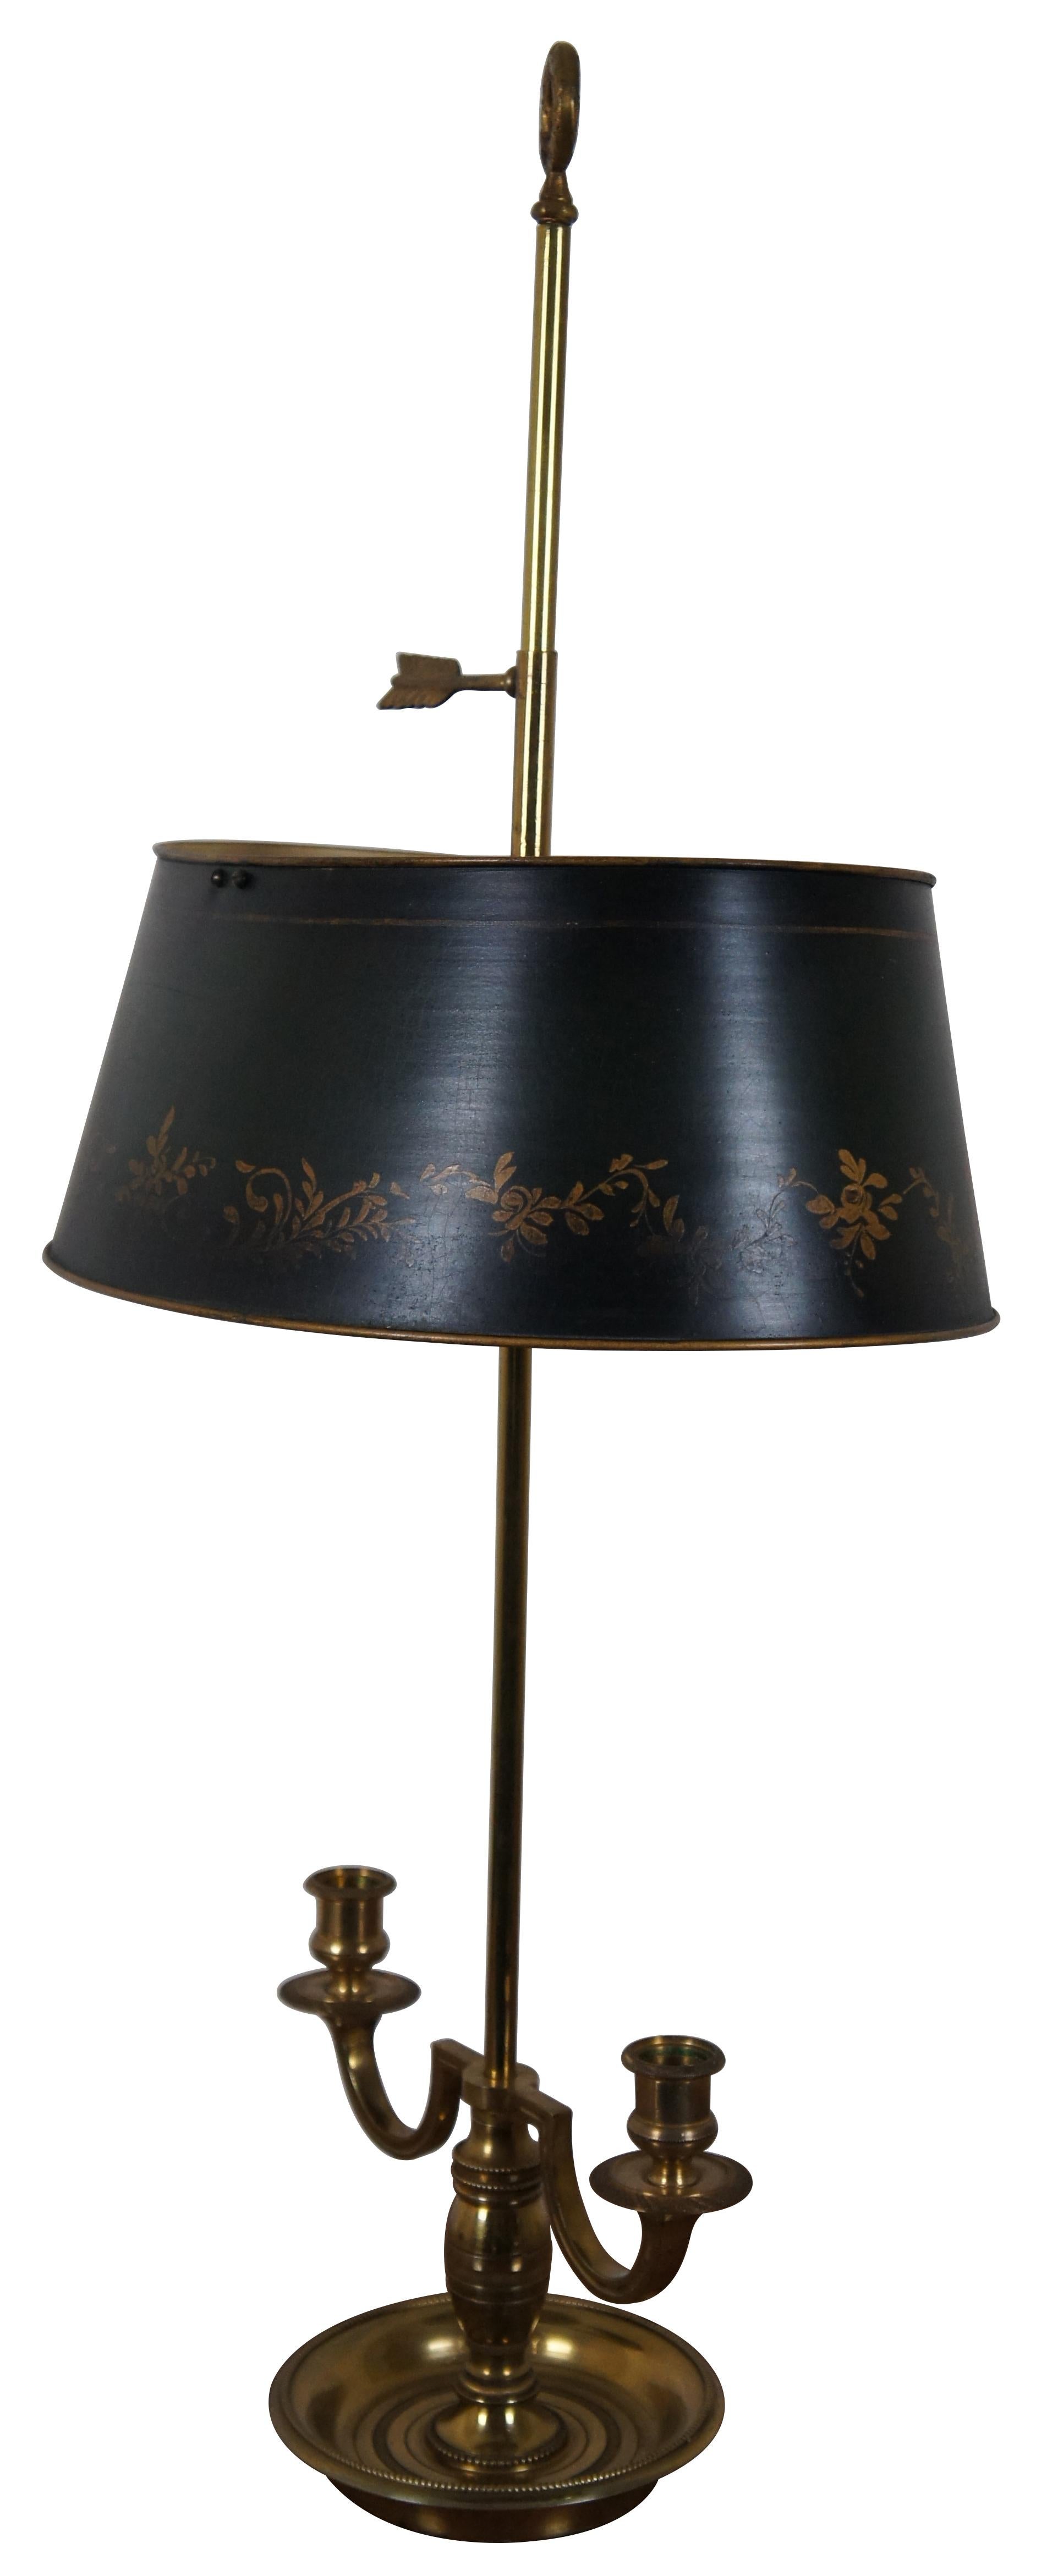 Vintage mid-20th century French bouillotte style two light table lamp featuring a brass double candlestick base, arrow and wreath finial, and hand painted black and gold tole metal shade. Measure: 29